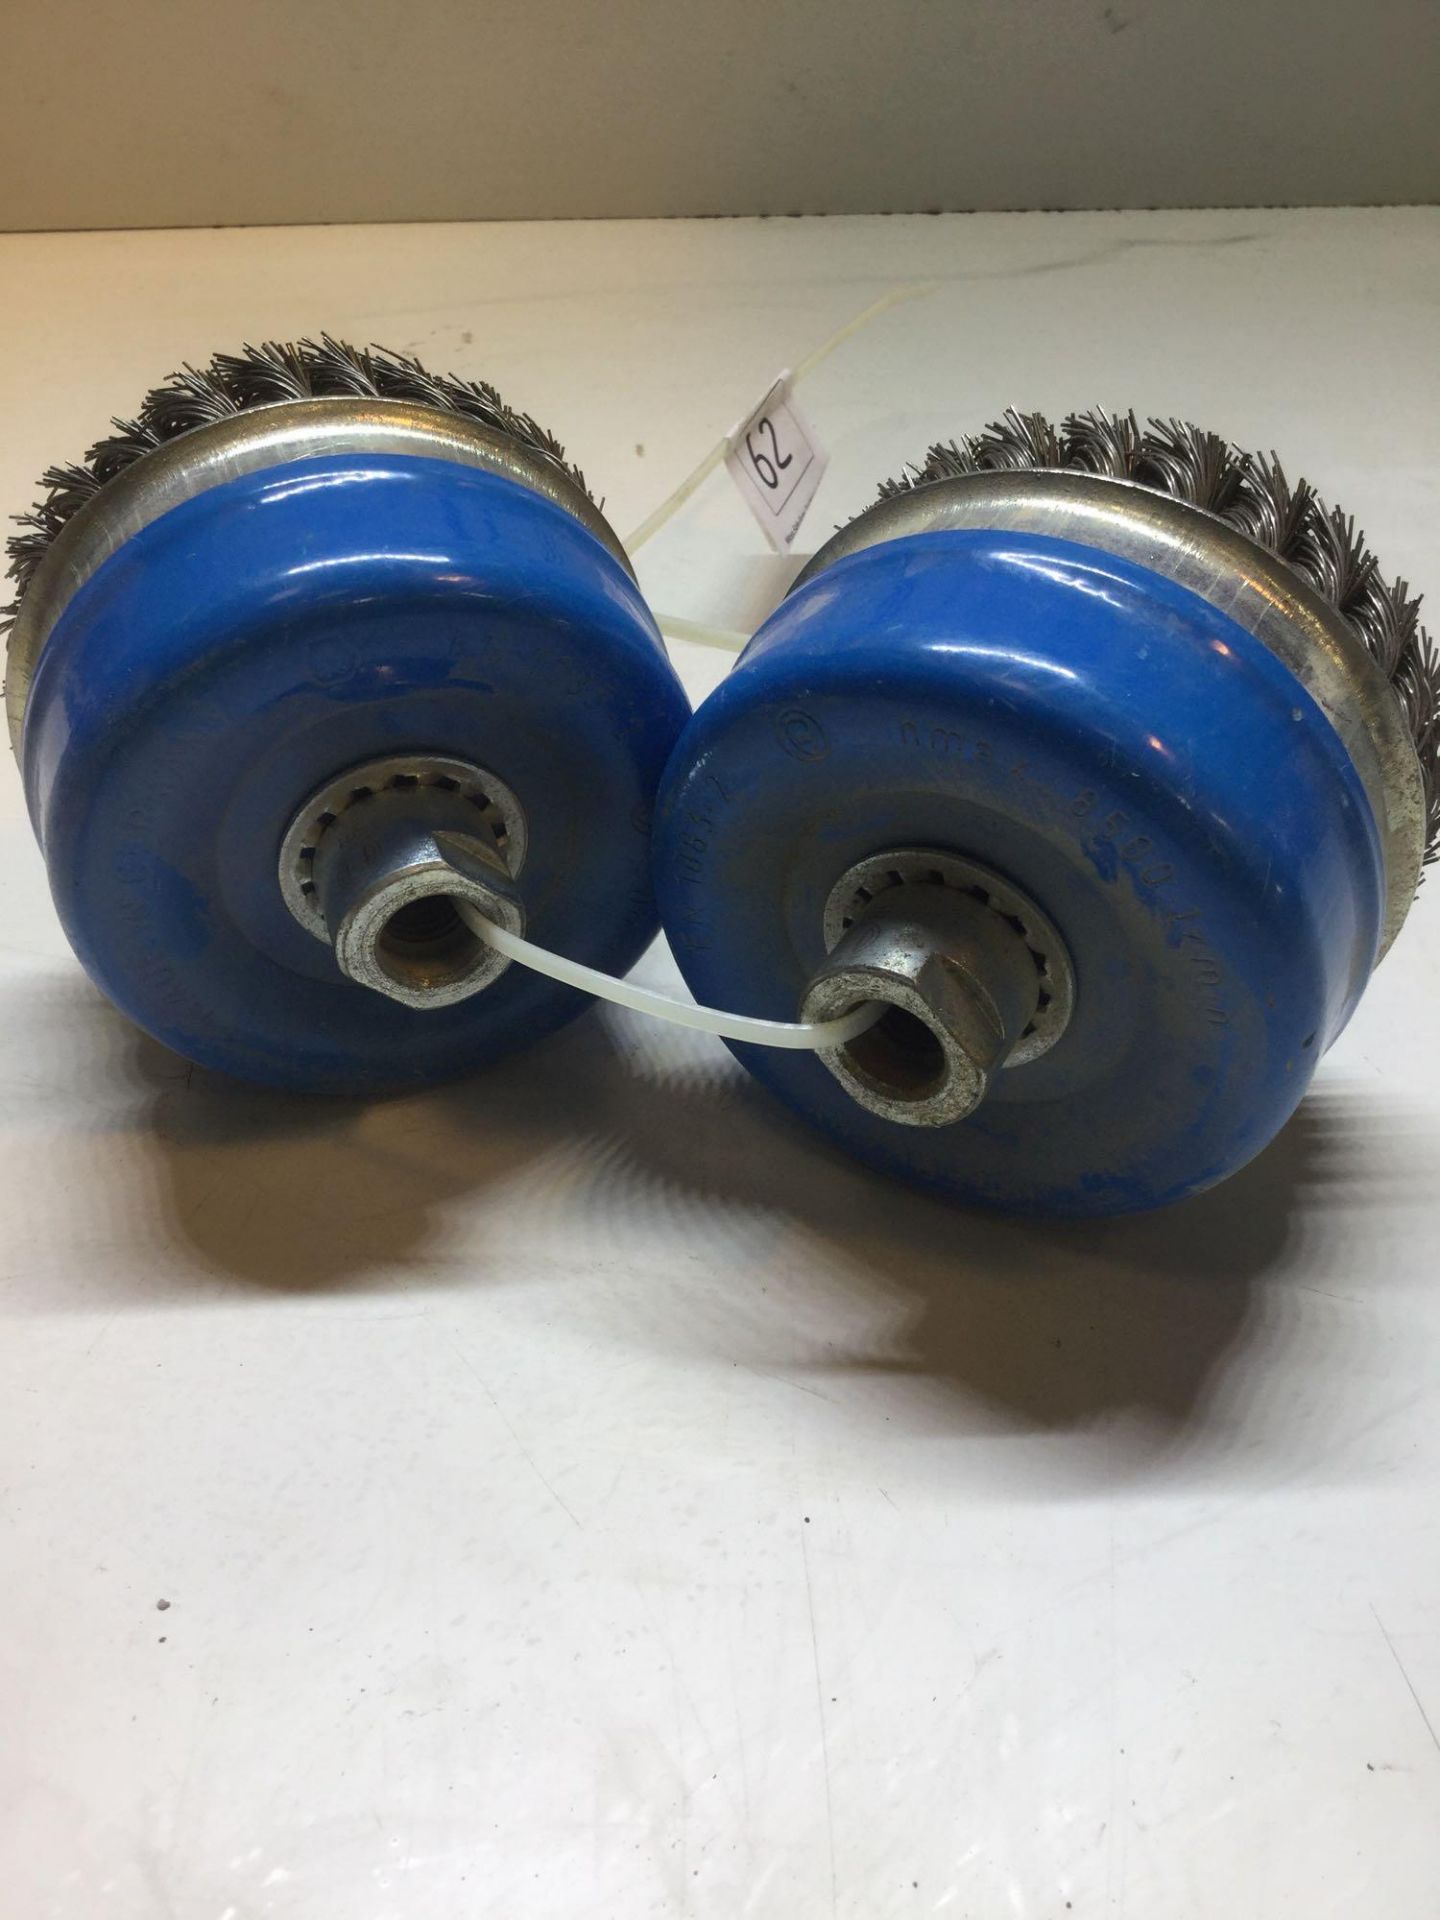 Bosch 100mm Metal Brush Wheel x2 Unboxed - Image 2 of 2